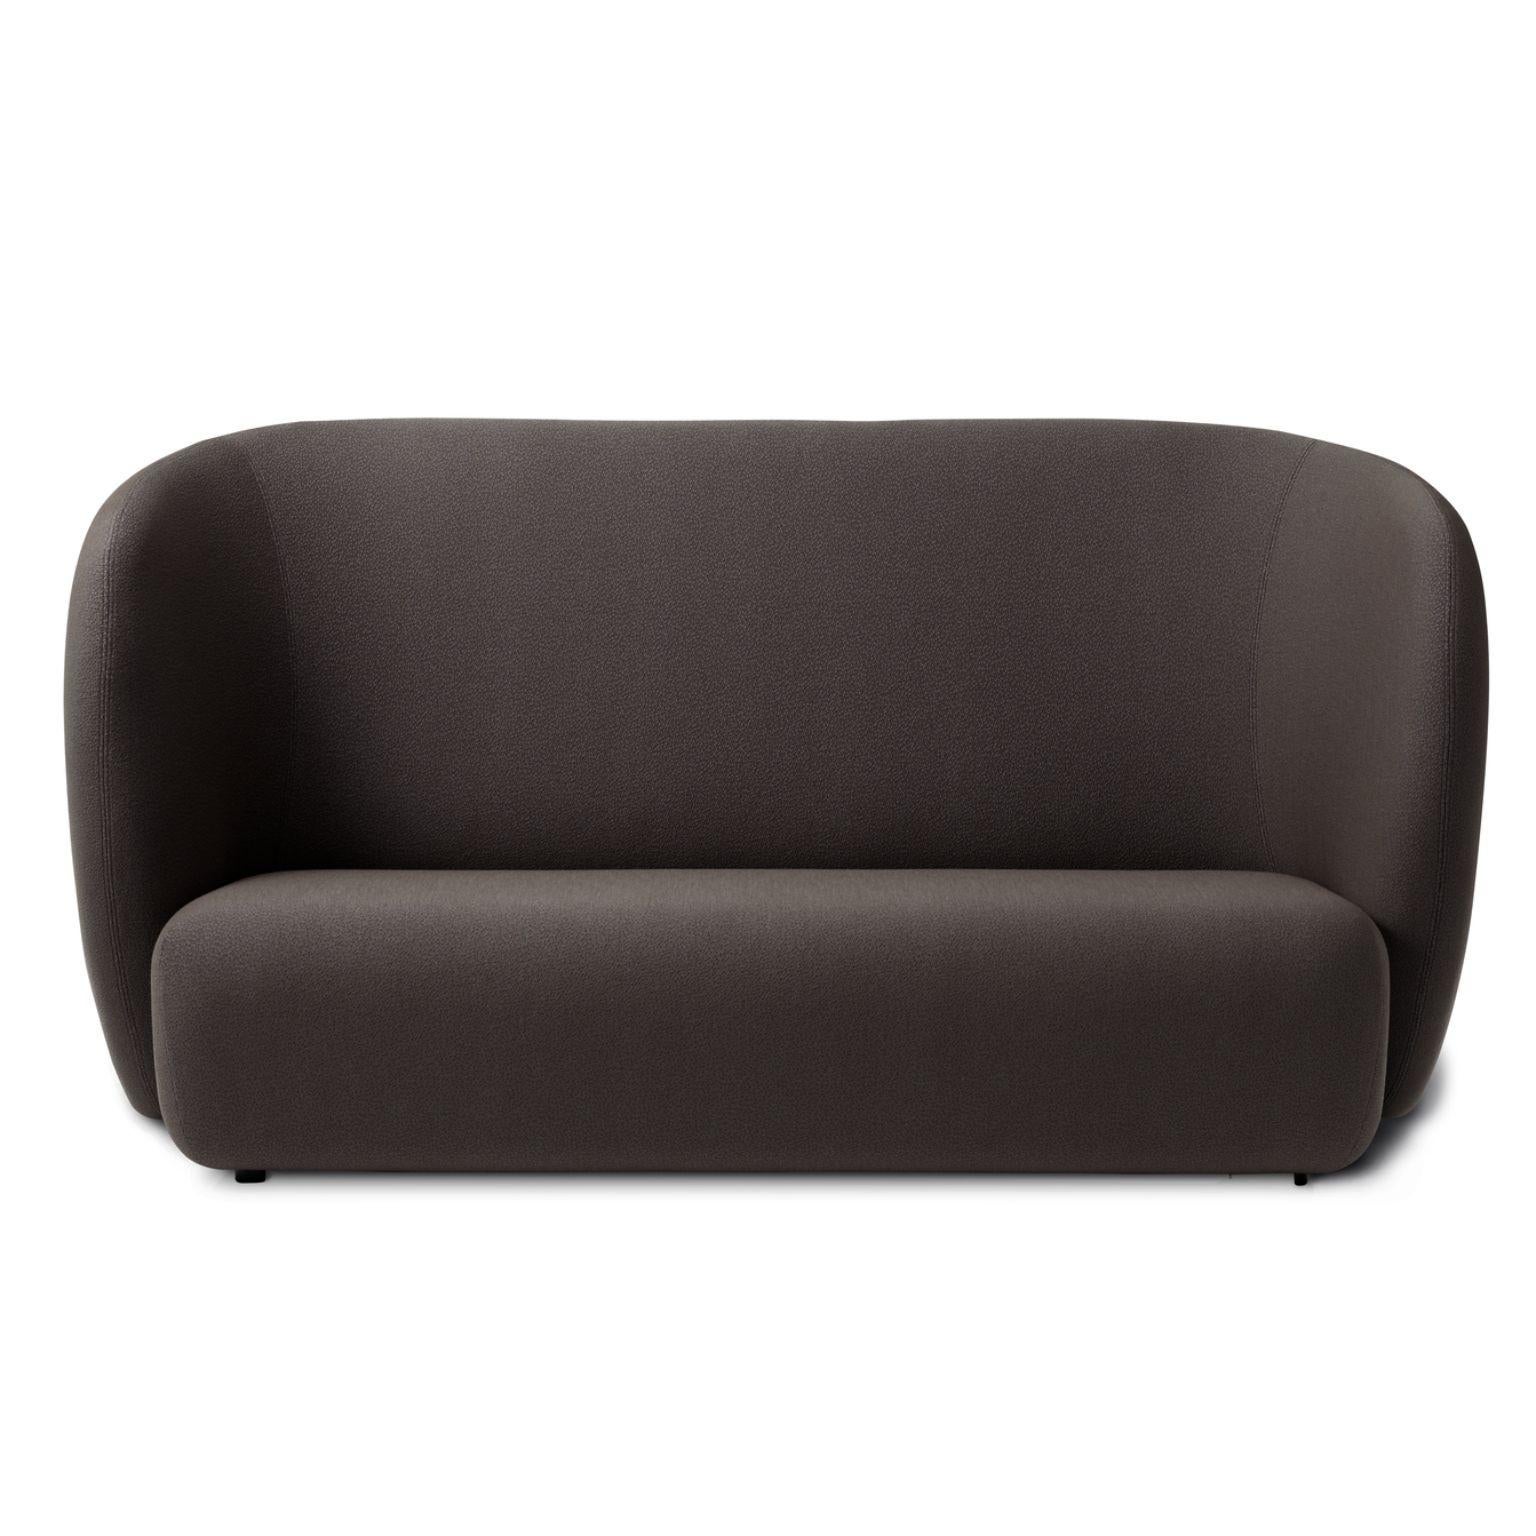 Haven 3 seater sprinkles mocca by Warm Nordic
Dimensions: D220 x W84 x H 110/40 cm
Material: Textile upholstery, Foam, Spring system, Wood
Weight: 84 kg
Also available in different colours and finishes. 

Haven is a contemporary sofa with a